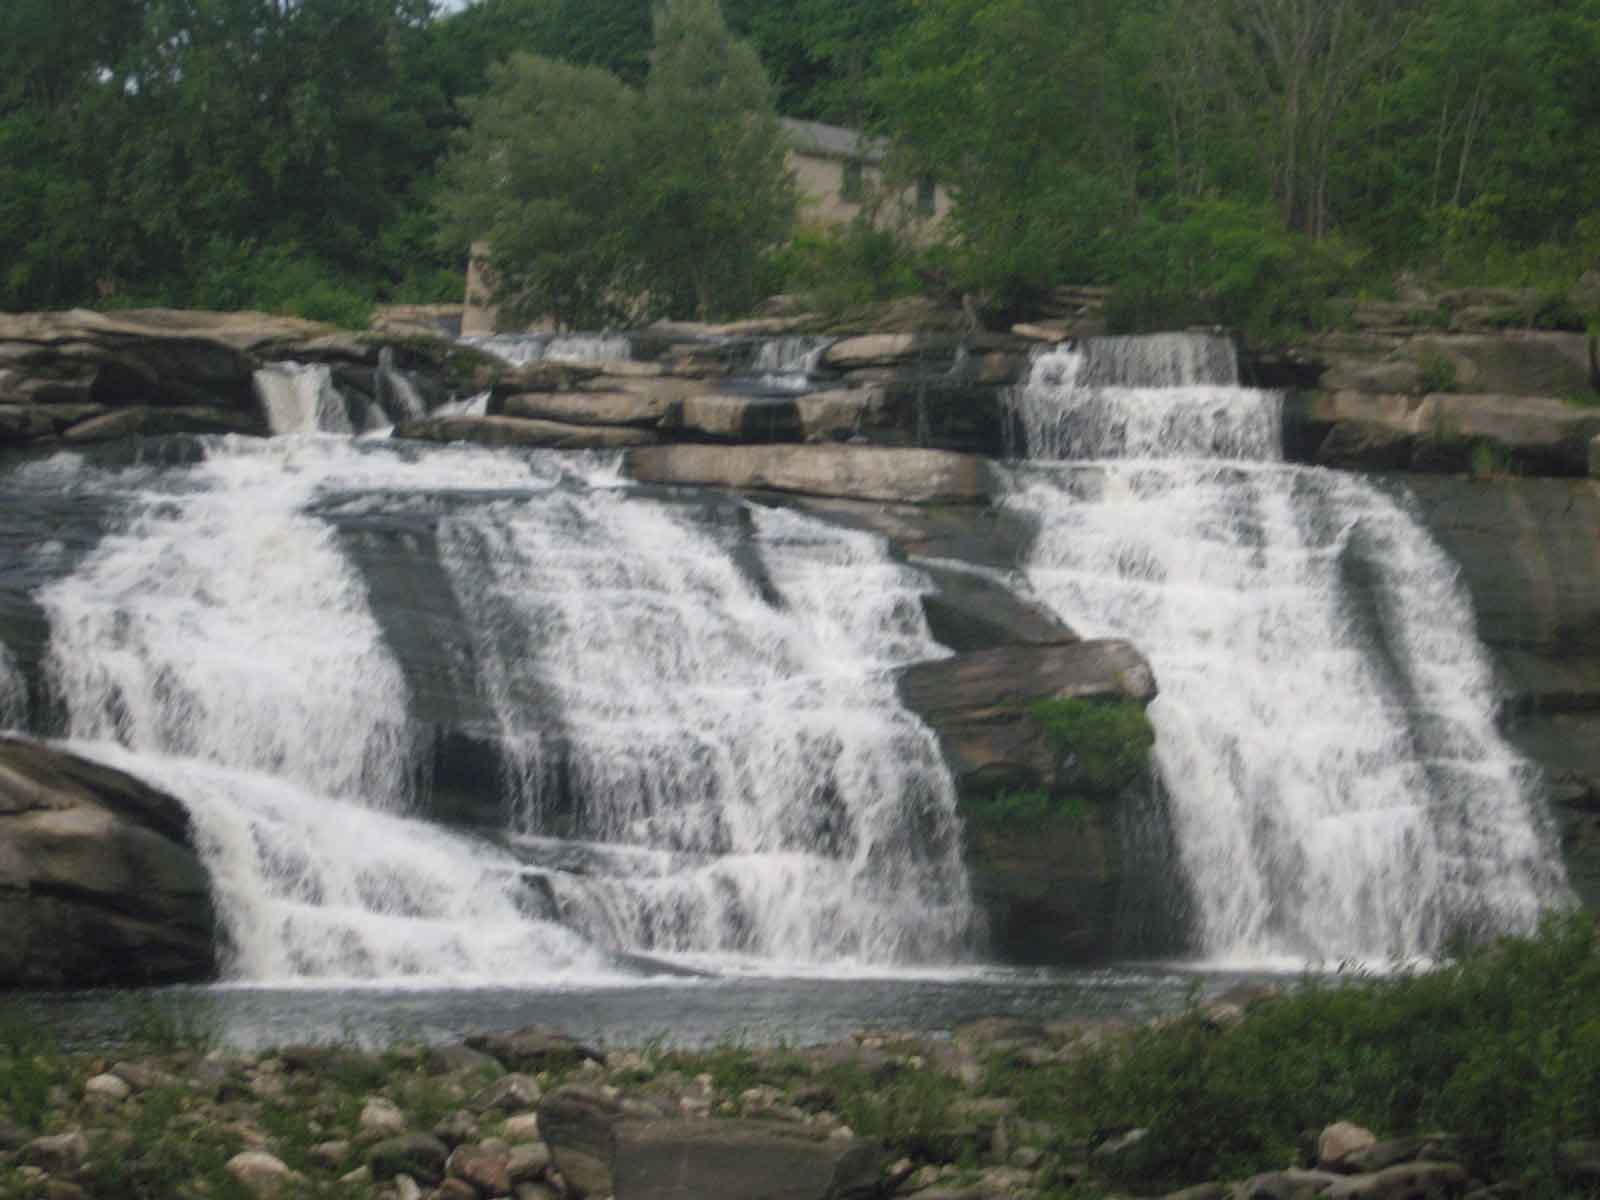 Great Falls. Its a great waterfall after such a heavy rain.